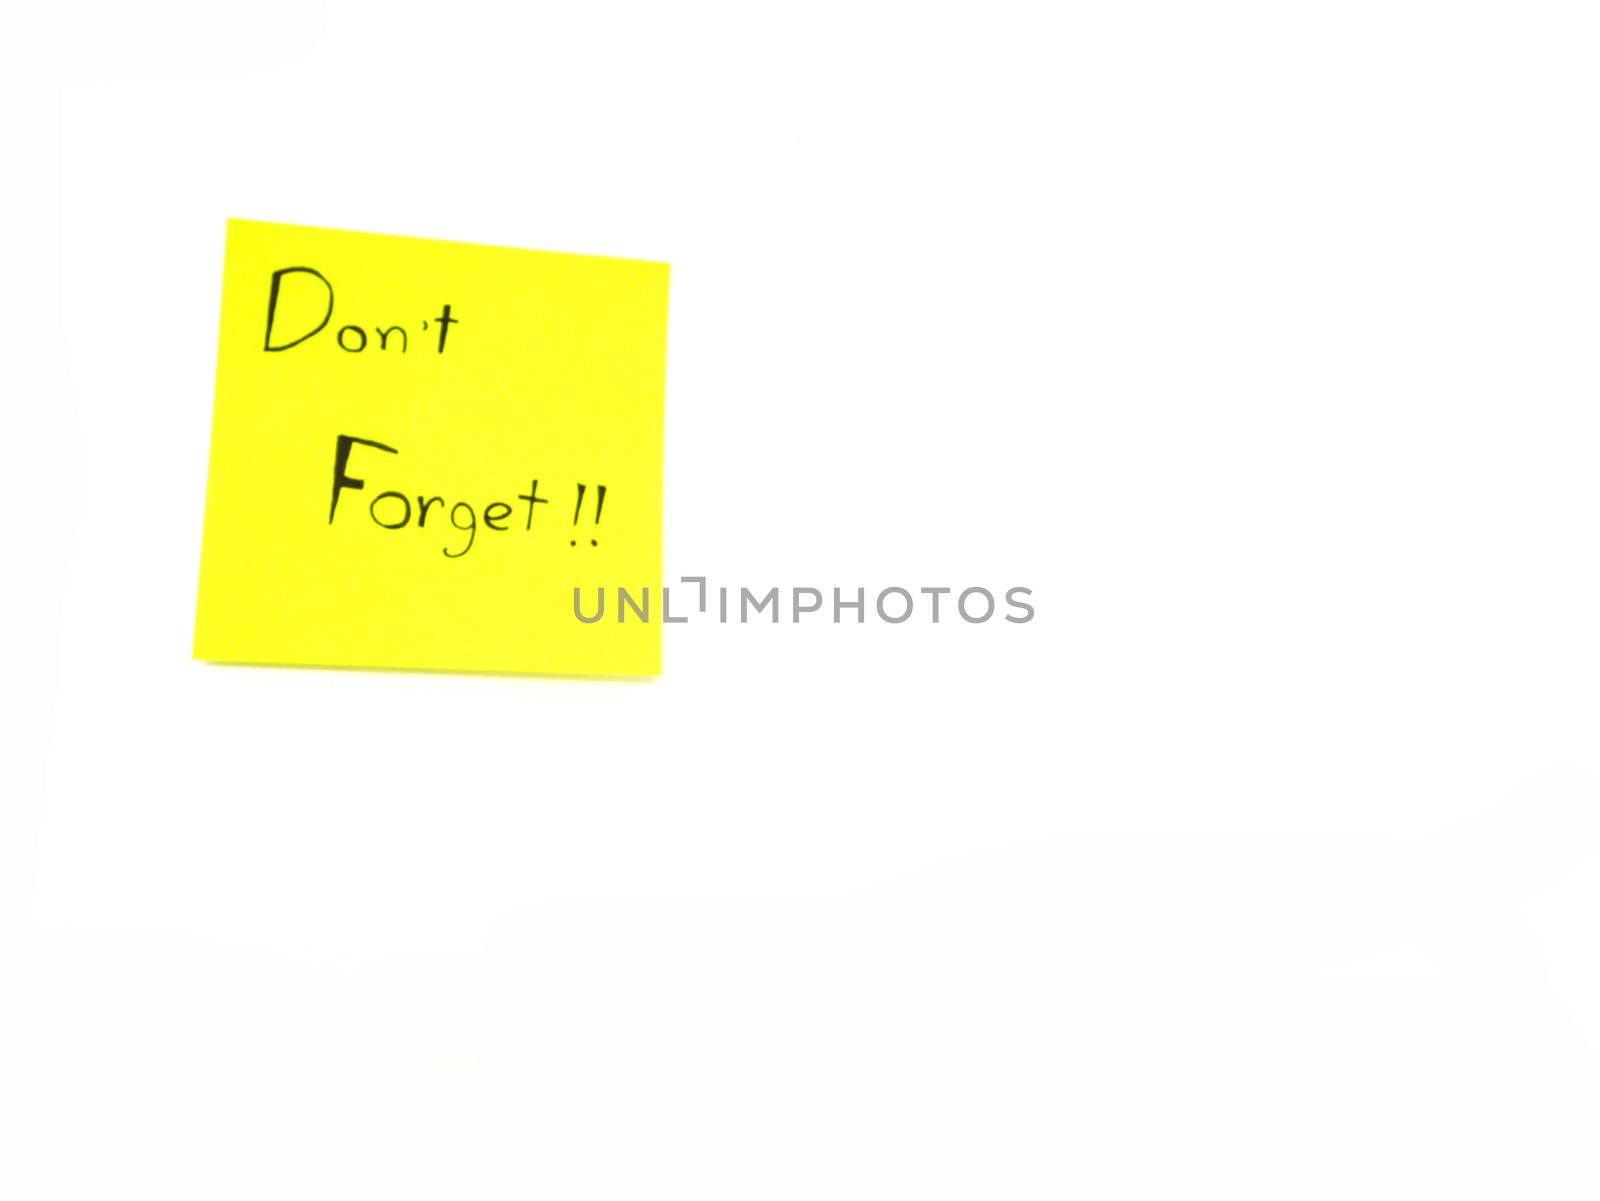 Don't forget in post it note  on white background with copy space